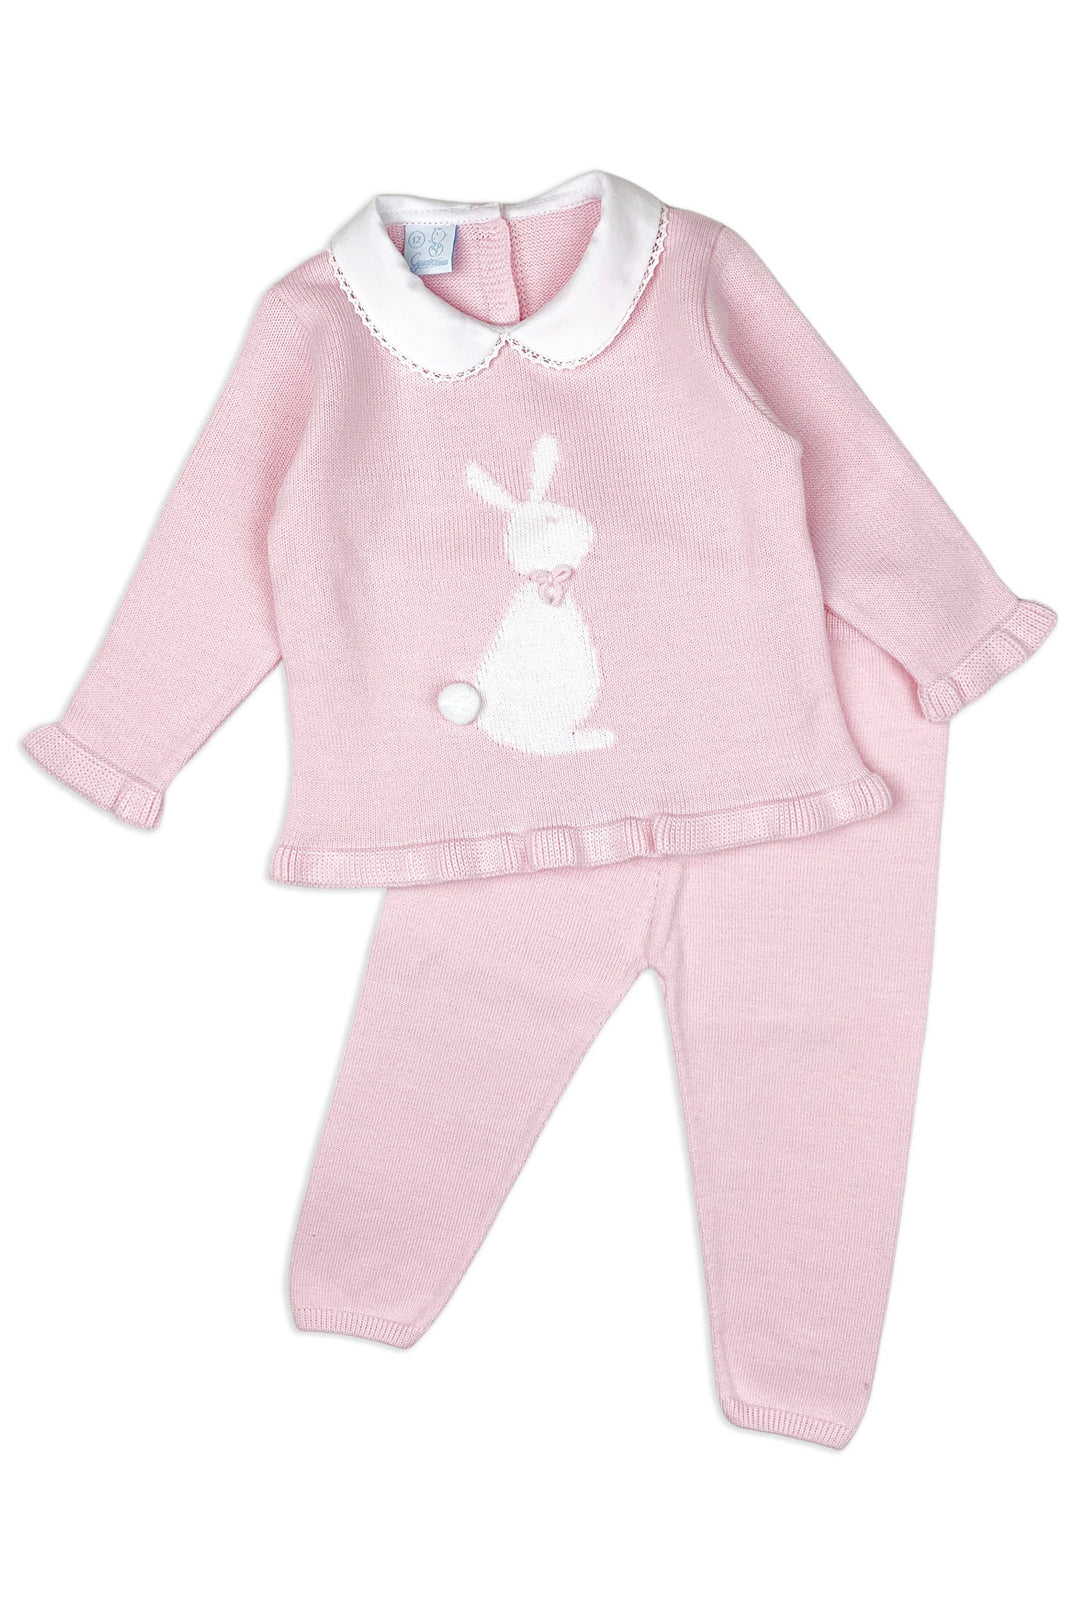 Granlei "Cecilia" Baby Pink Knitted Bunny Top & Trousers | iphoneandroidapplications